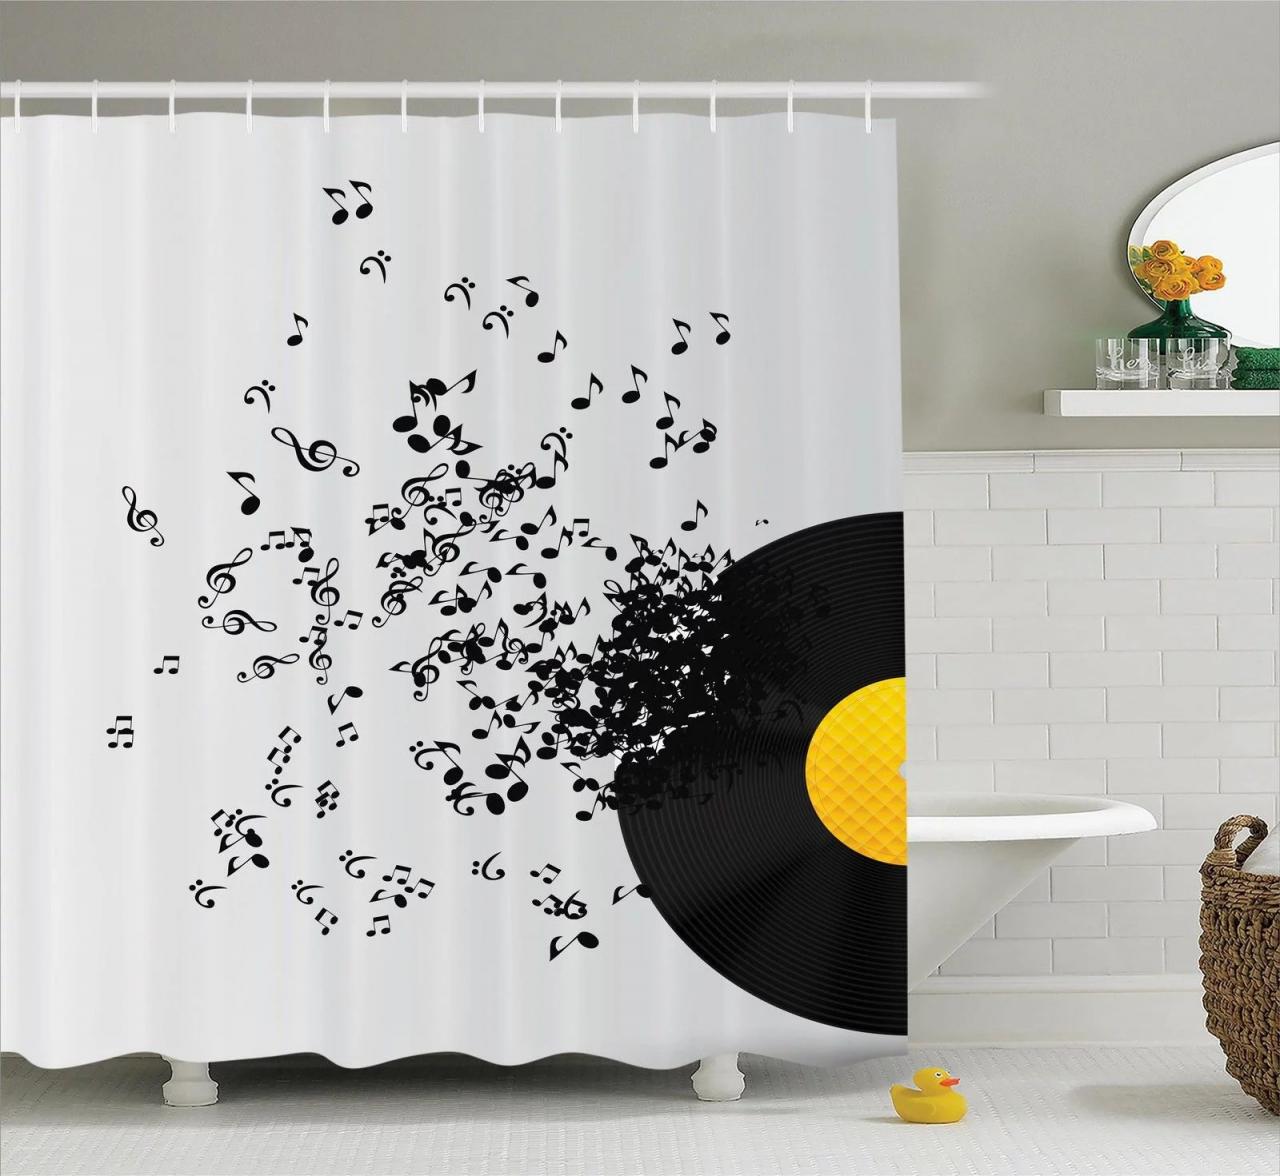 Music Decor Shower Curtain Set, Abstract Music Illustration Flying